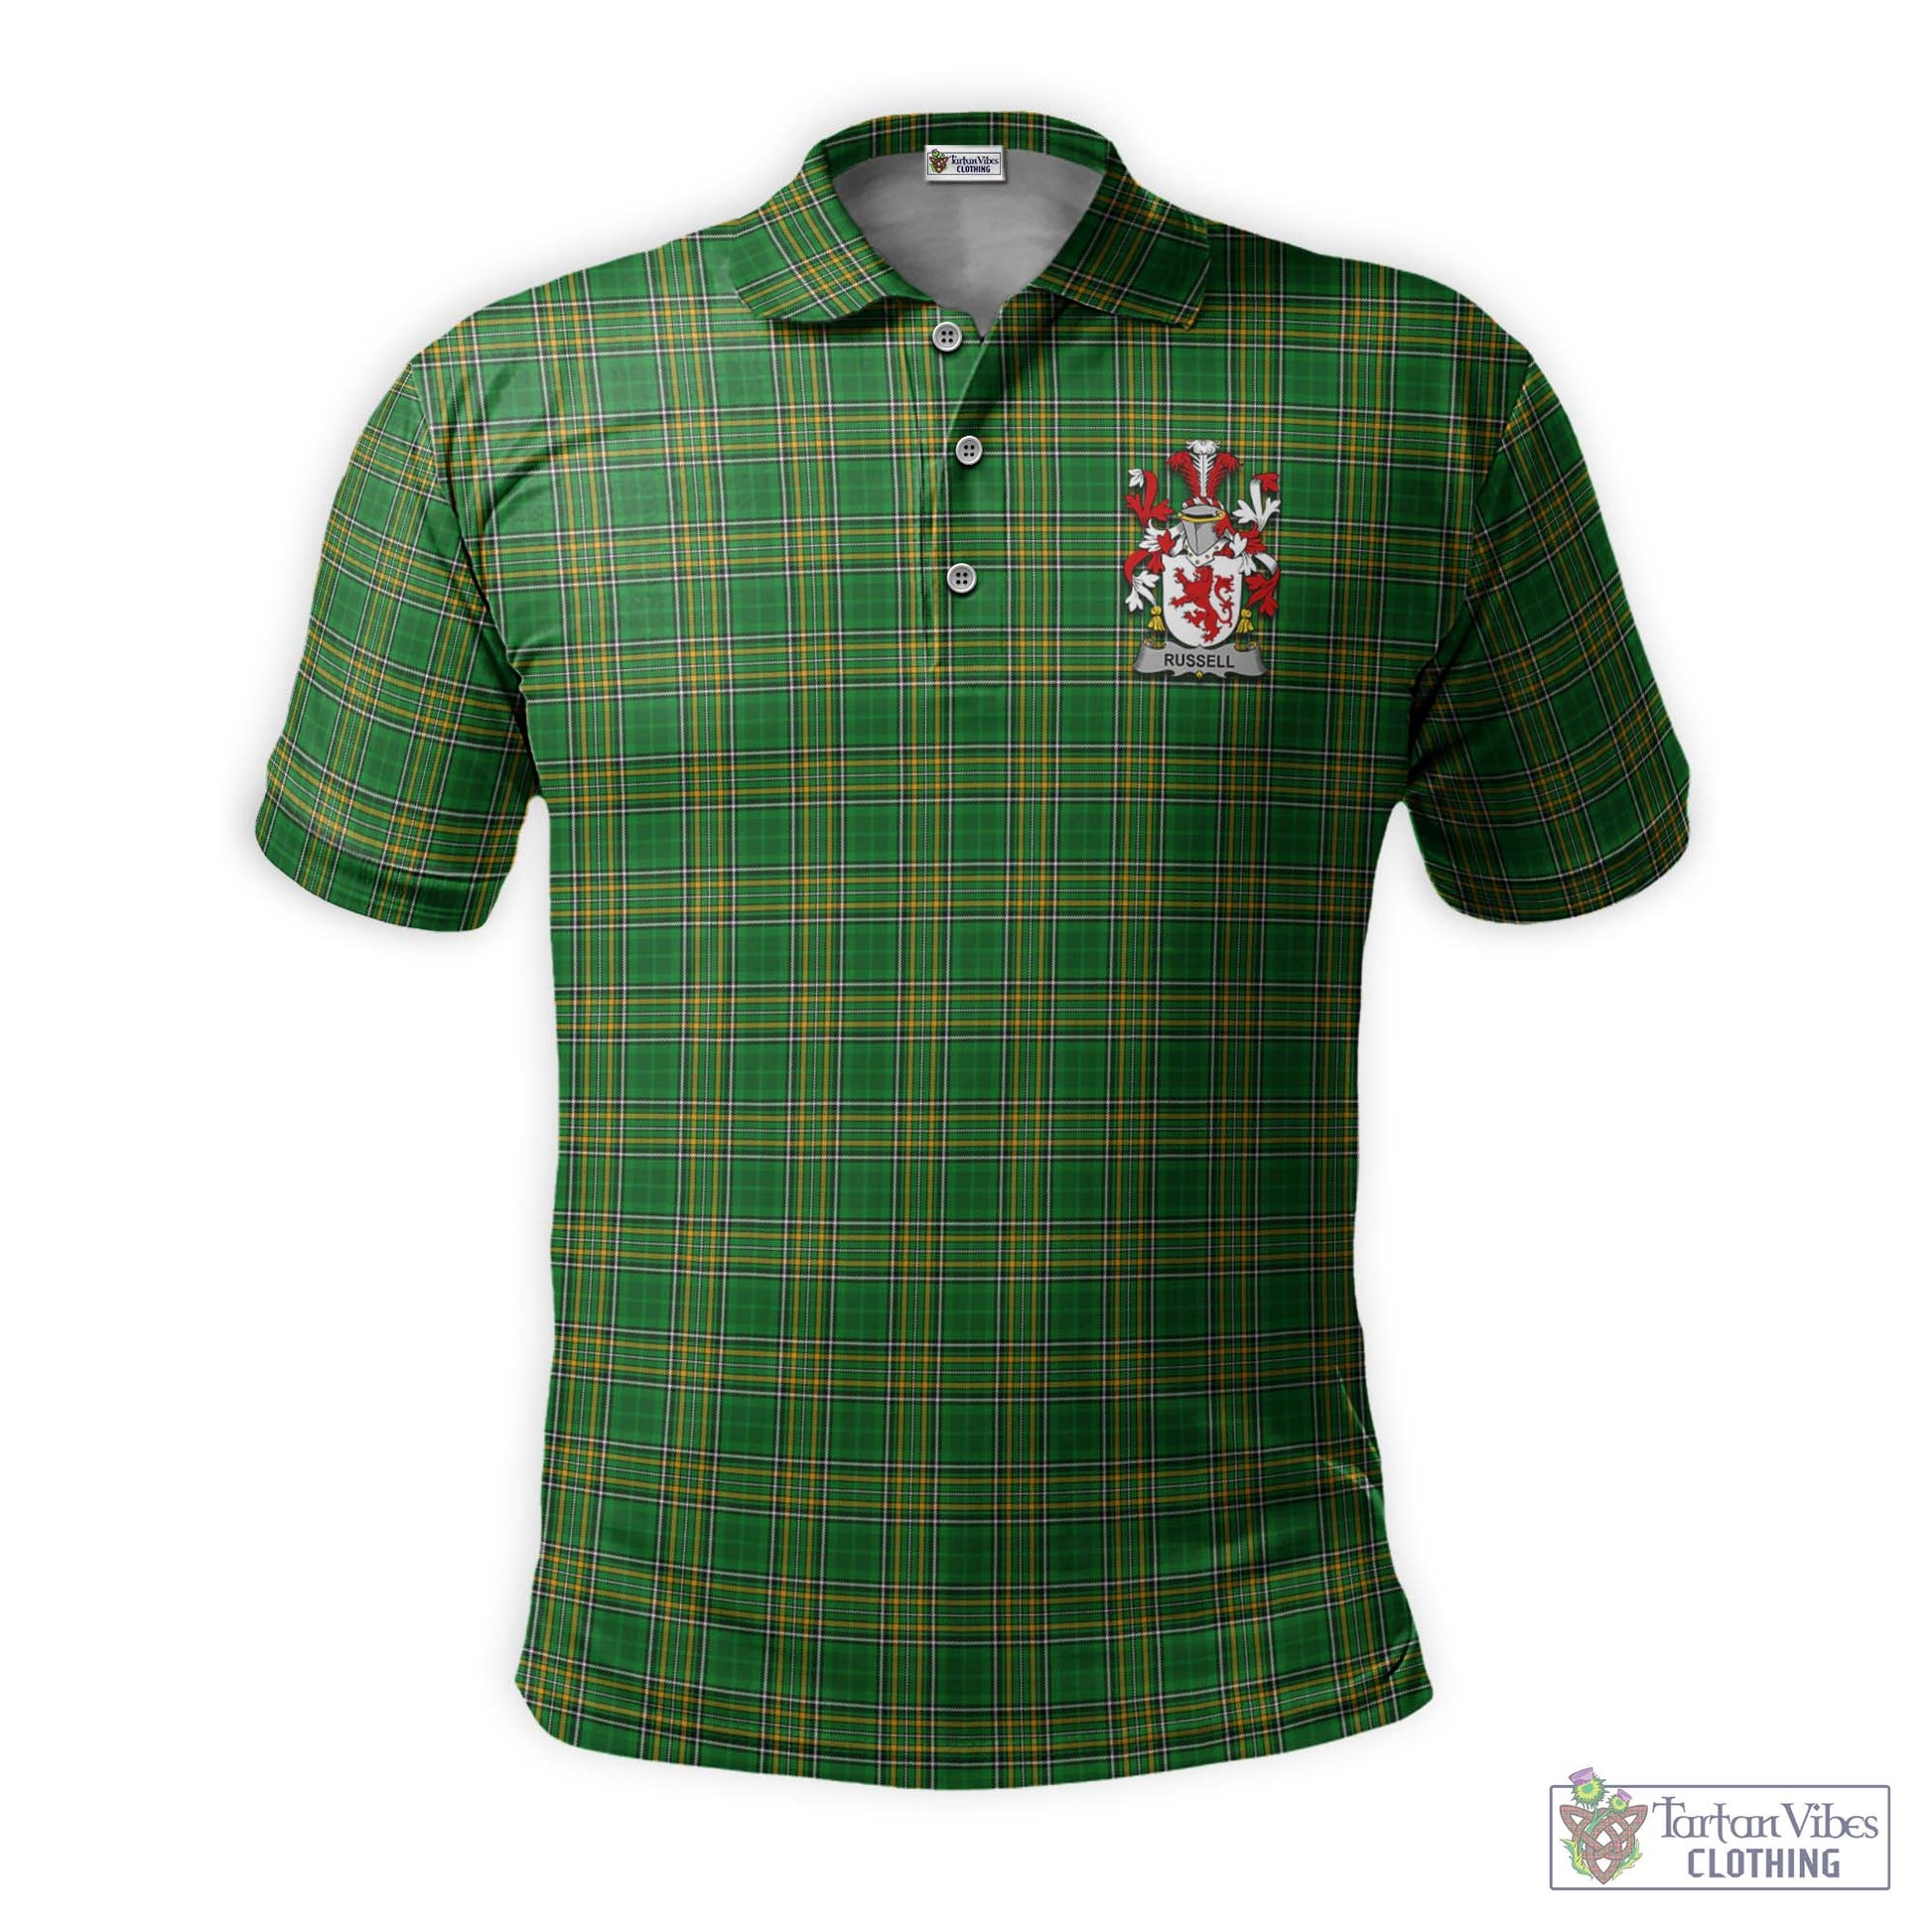 Tartan Vibes Clothing Russell Ireland Clan Tartan Polo Shirt with Coat of Arms